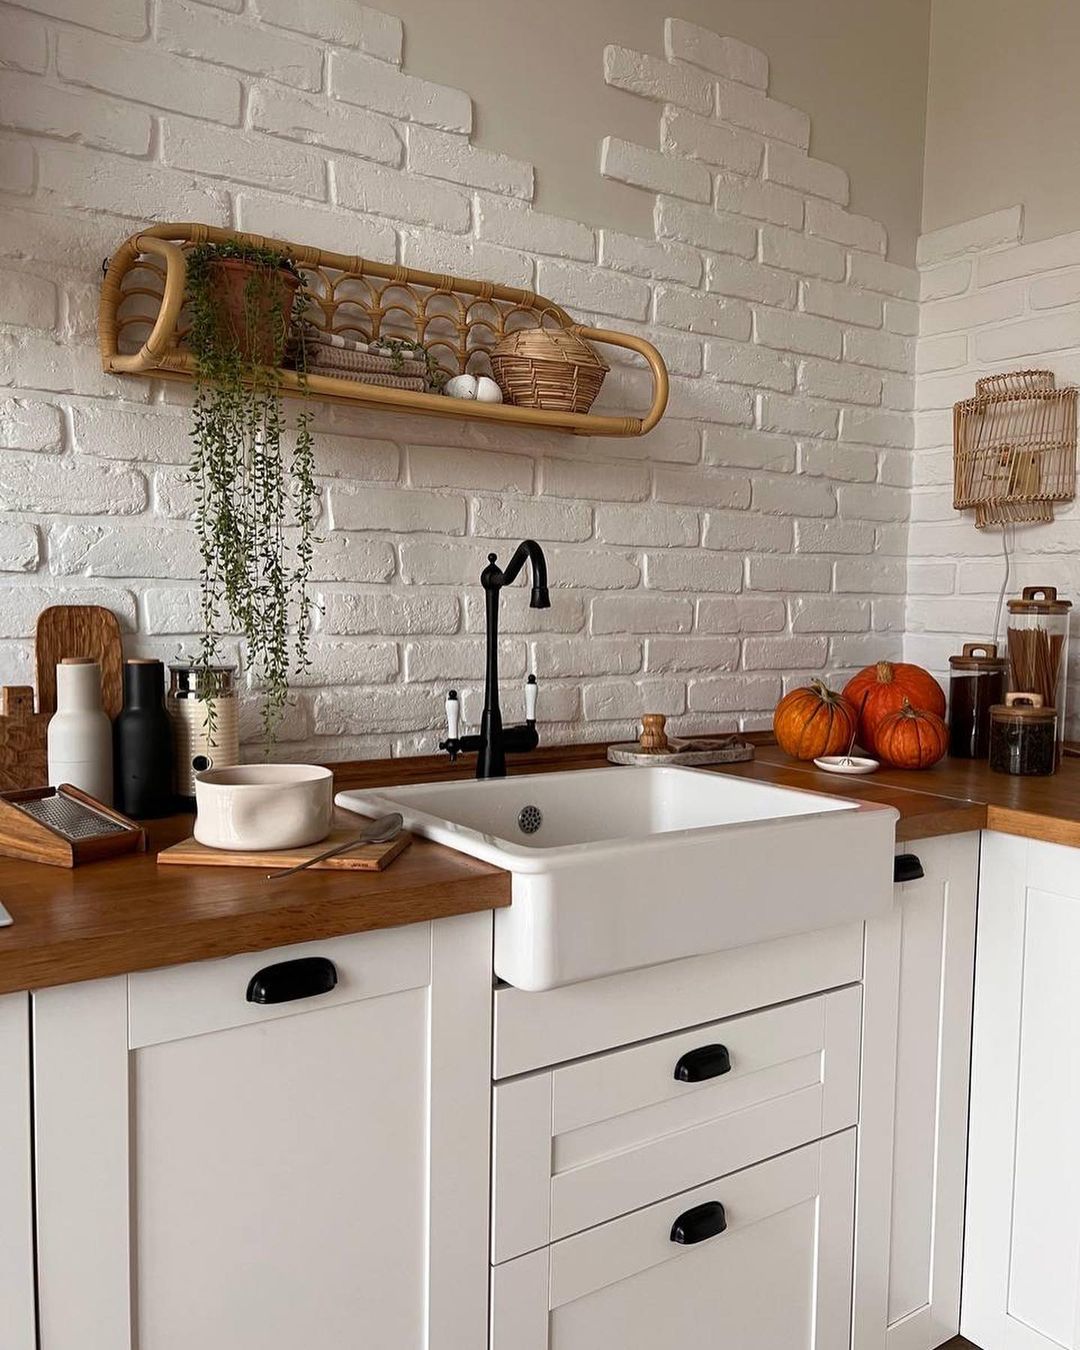 Rustic Appeal with Textured Brick Tiles